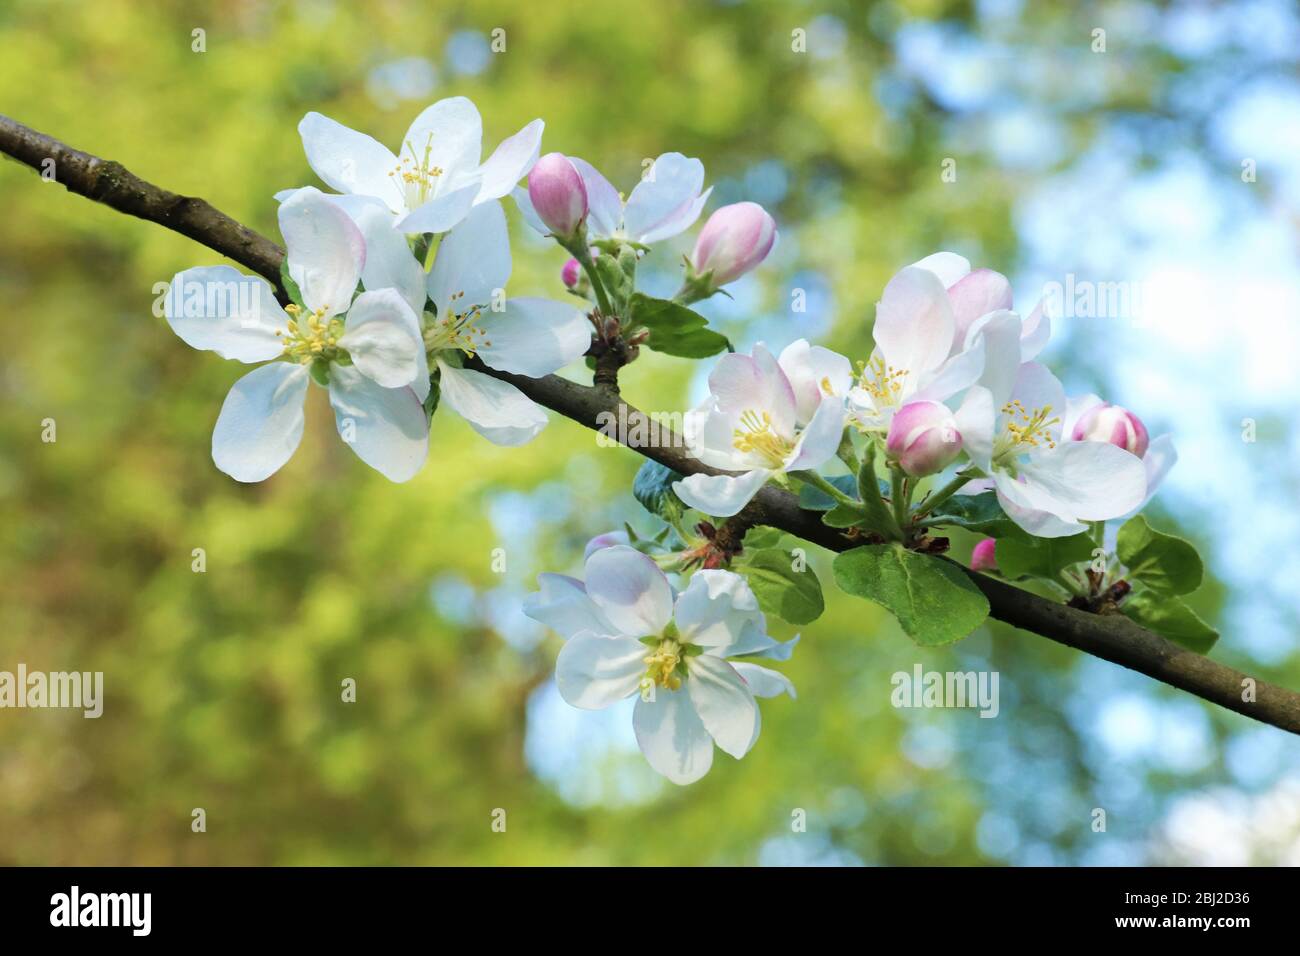 close-up of a branch with white apple blossoms and pink buds on a sunny day Stock Photo